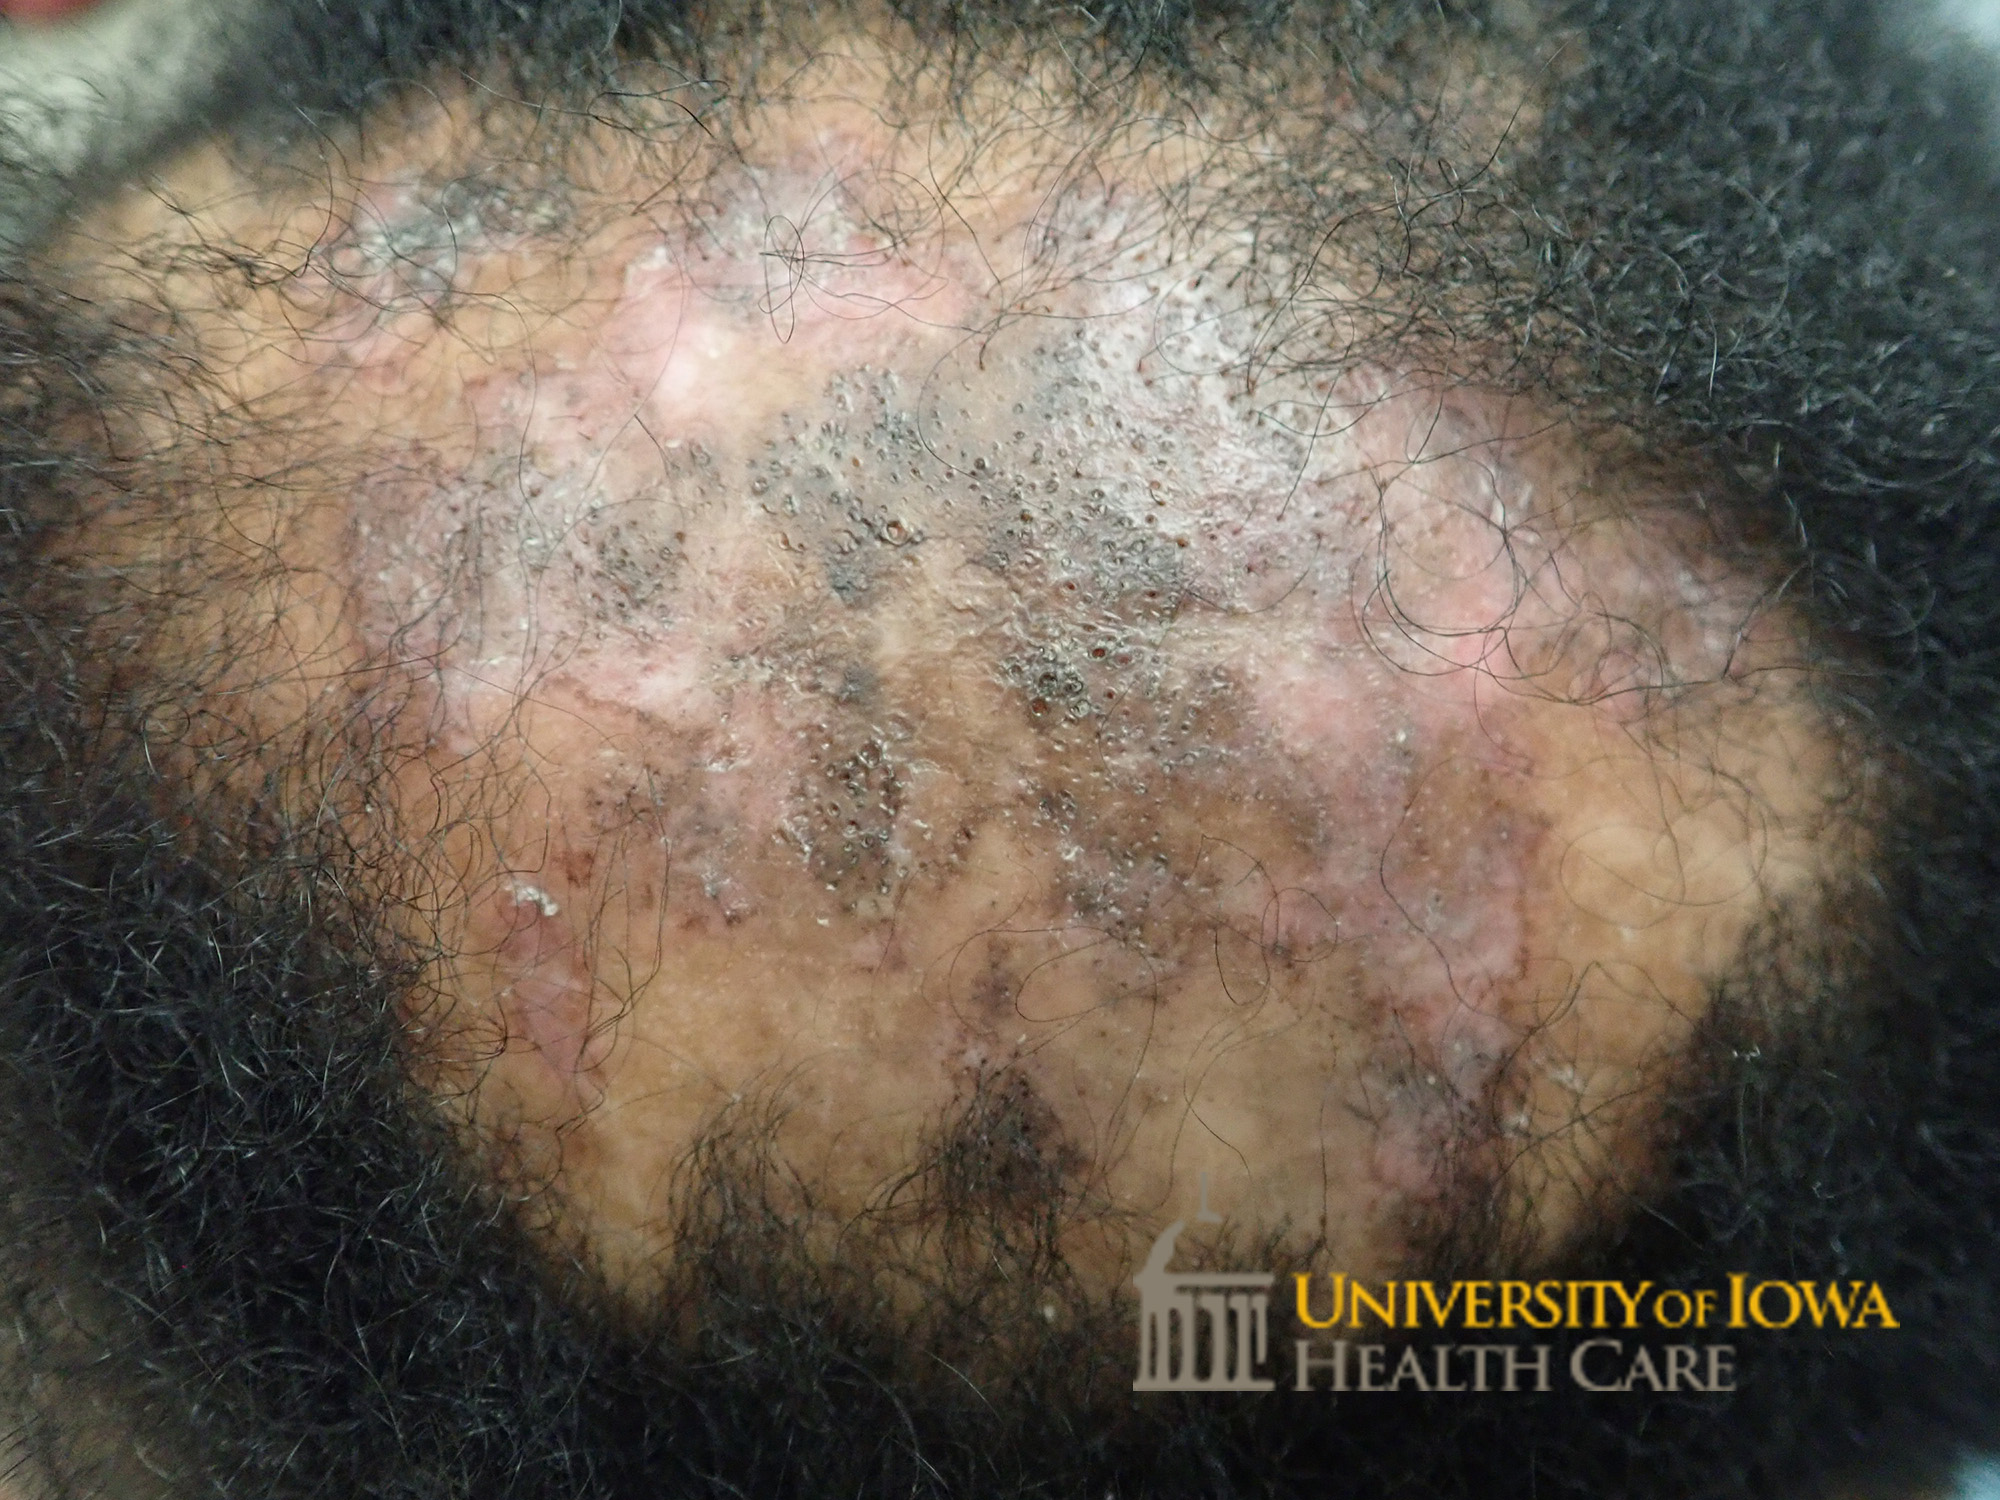 Atrophic, pink to violaceous plaque with focal areas of scale and associated scarring alopecia on the crown scalp. (click images for higher resolution).